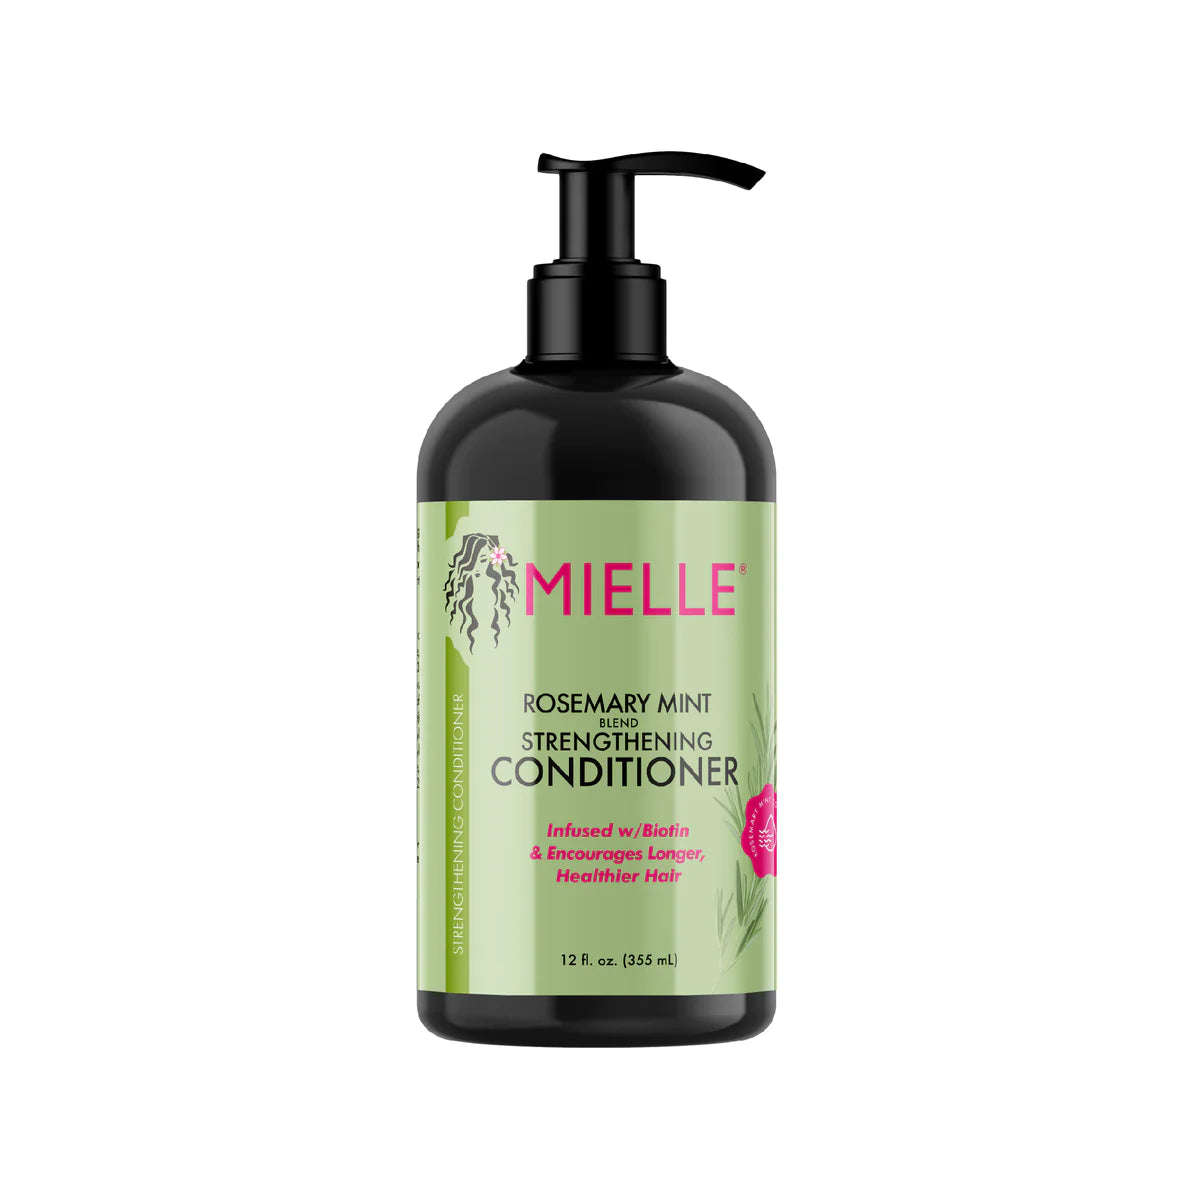 MIELLE ROSEMARY MINT STRENGHTENING CONDITIONER 12oz